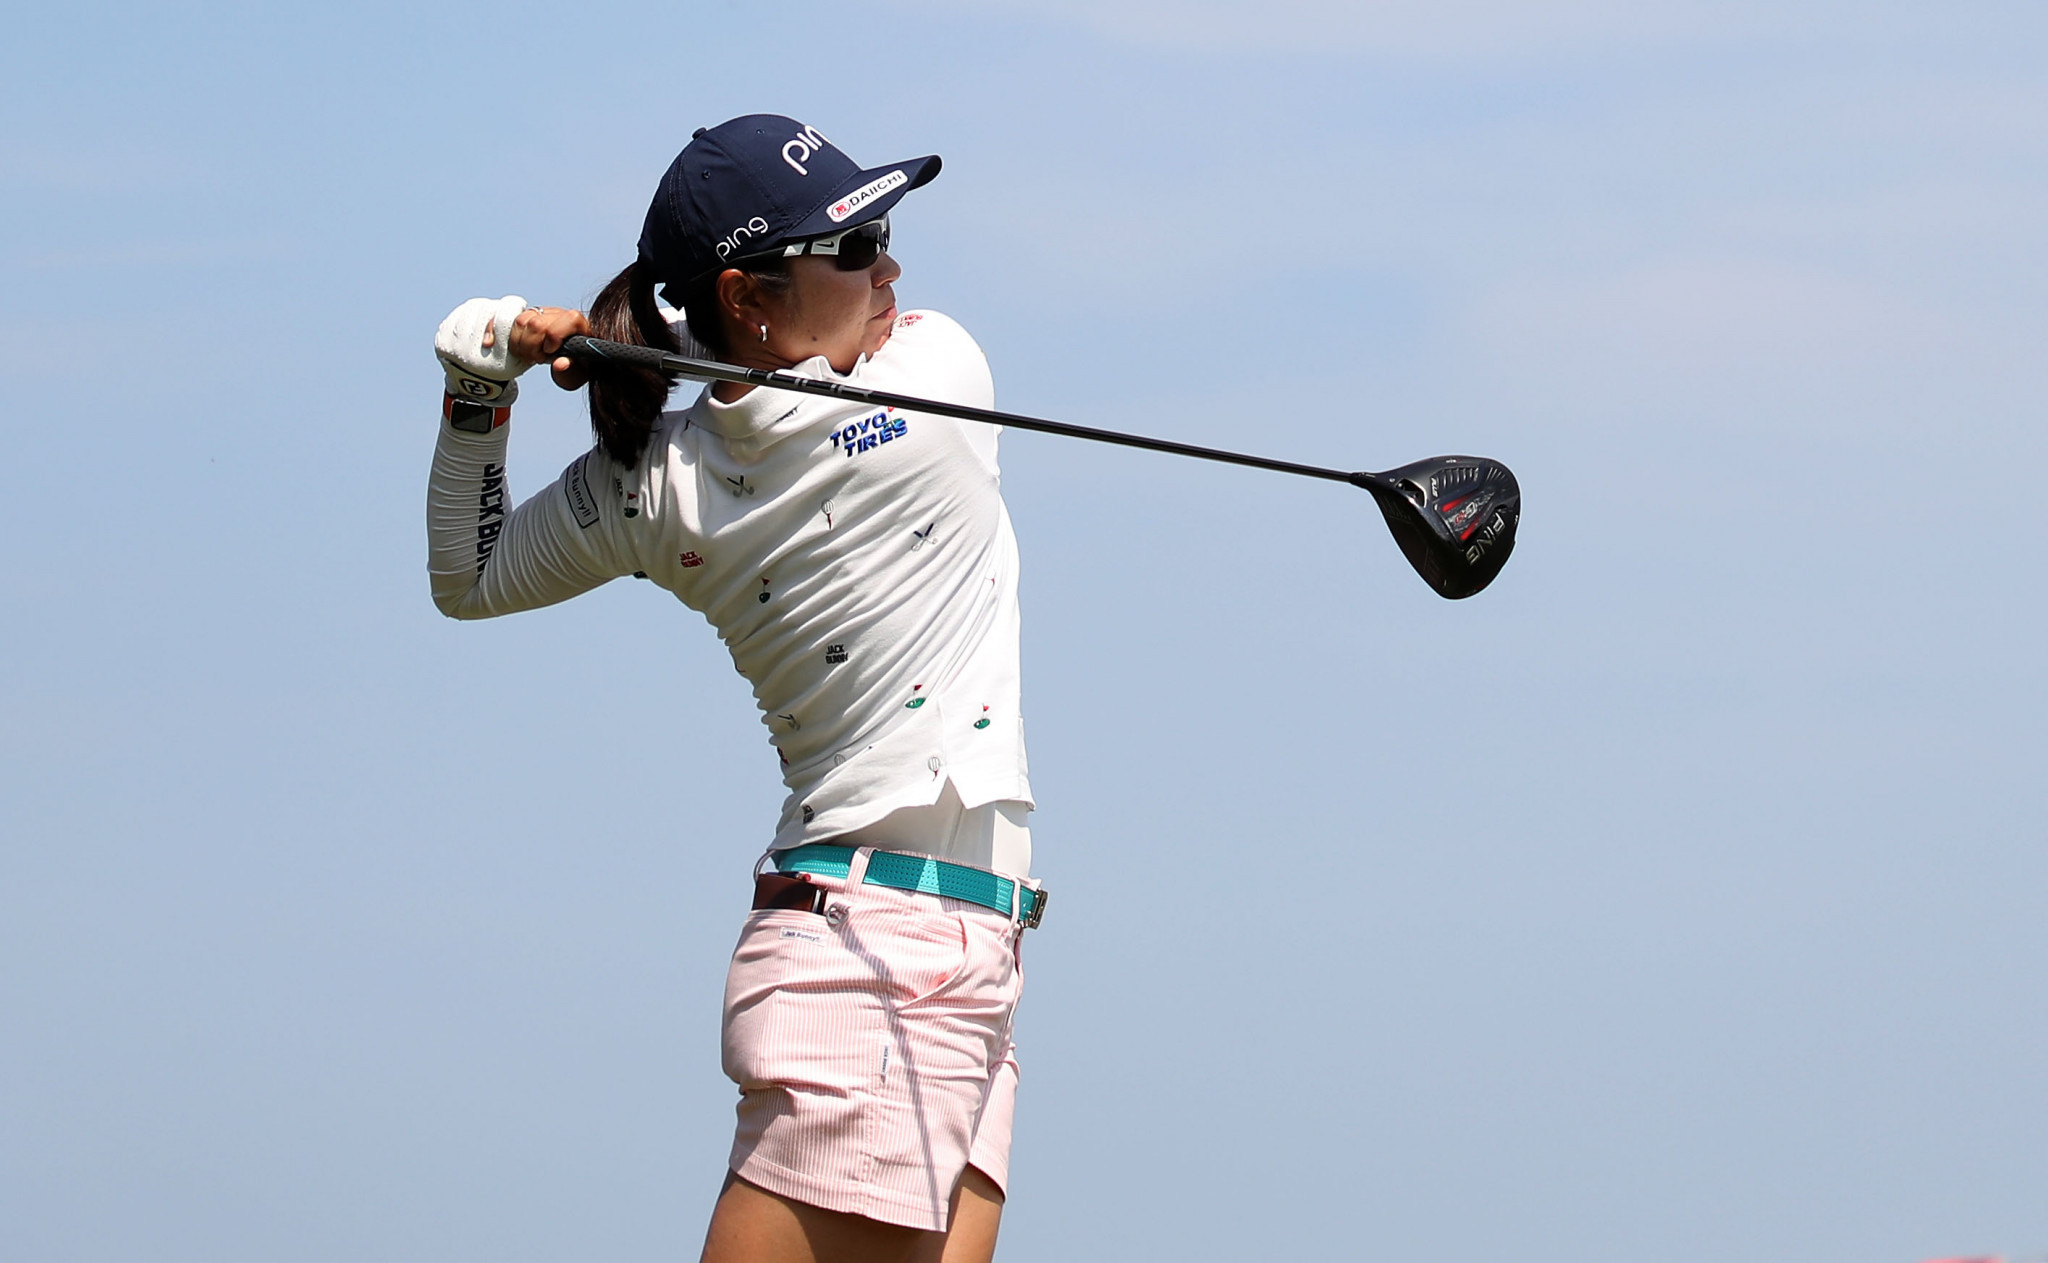 Japanese debutant Higa leads US Women's Open as thunderstorms delay play